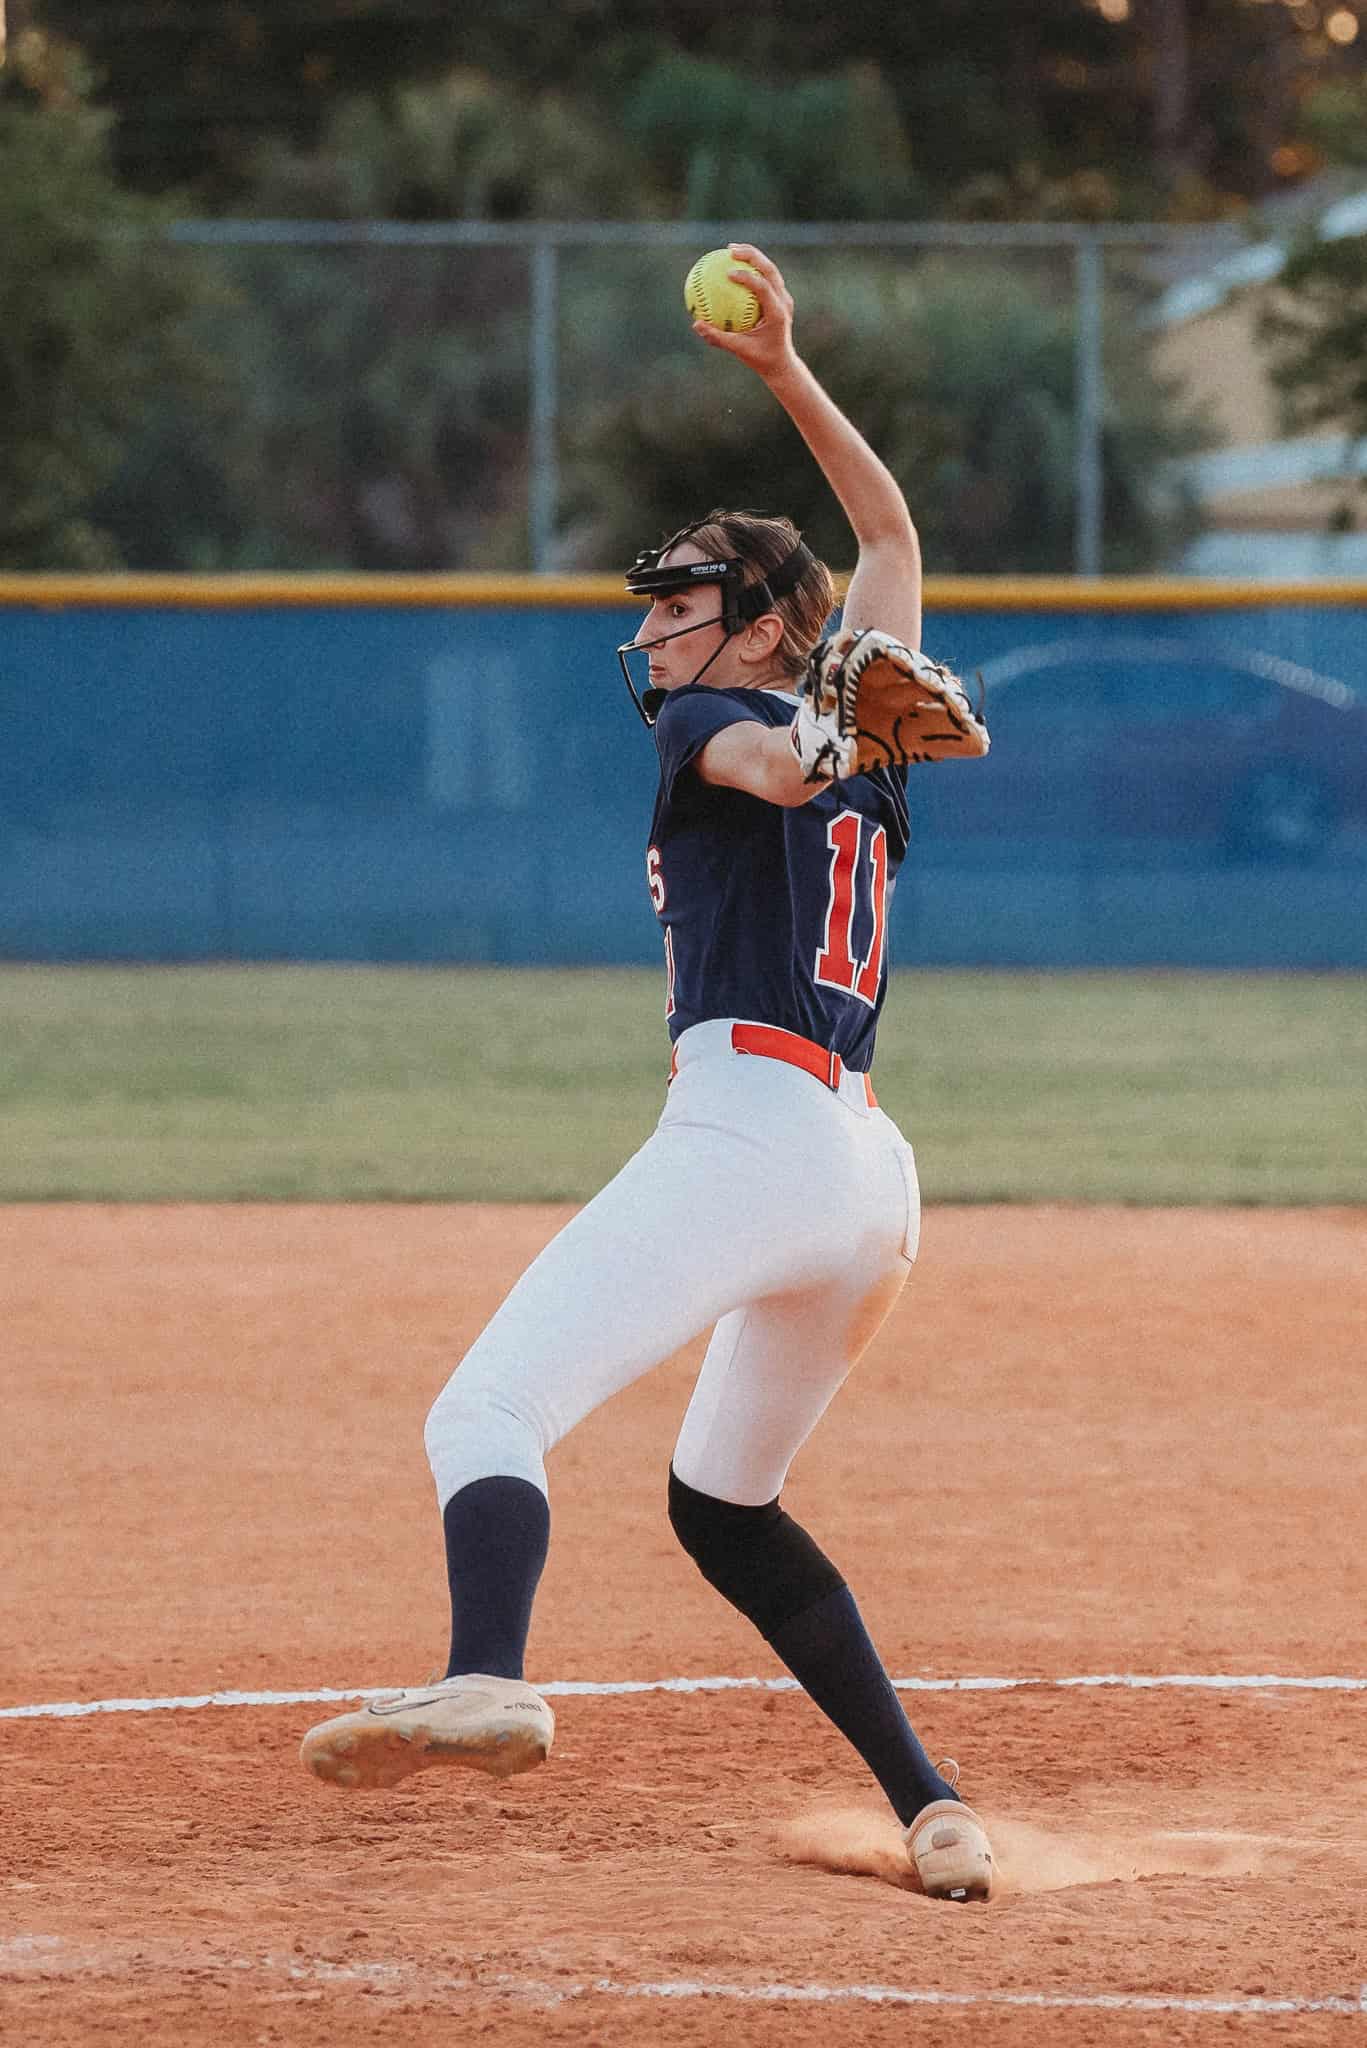 Springstead's pitcher Ava Miller takes the mound against Citrus. [Photo by Cynthia Leota]